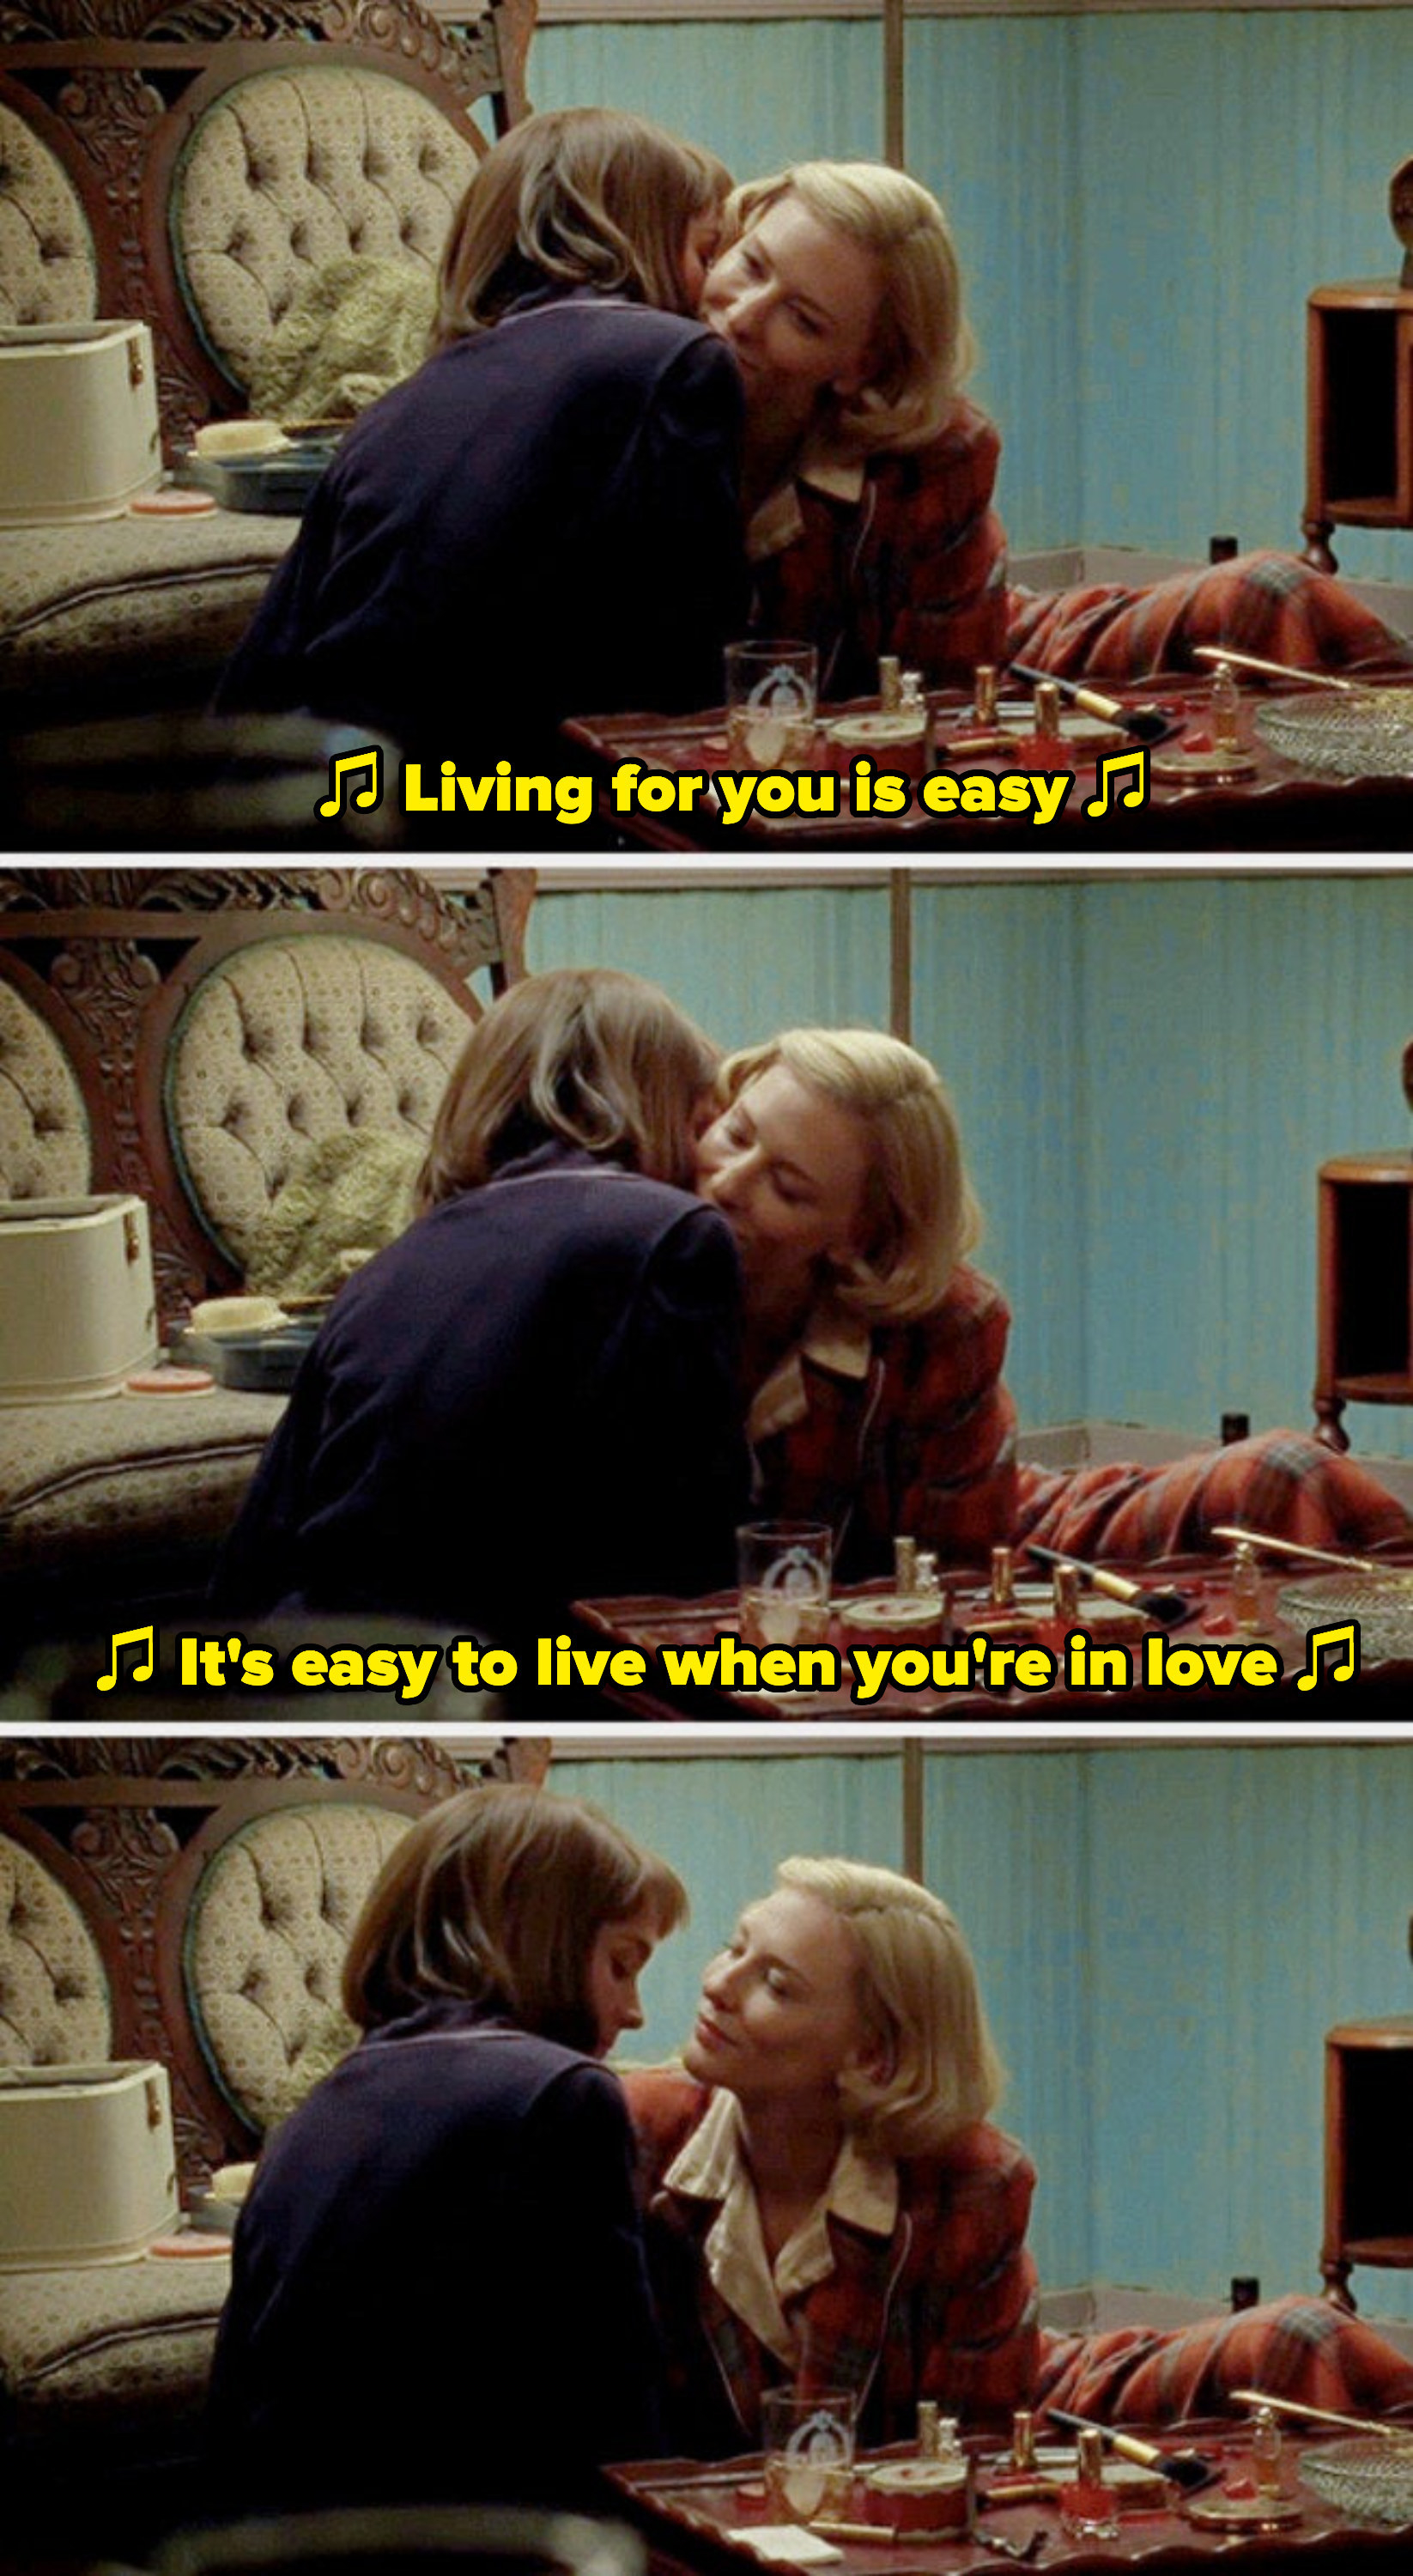 Carol and Therese from &quot;Carol&quot; embracing